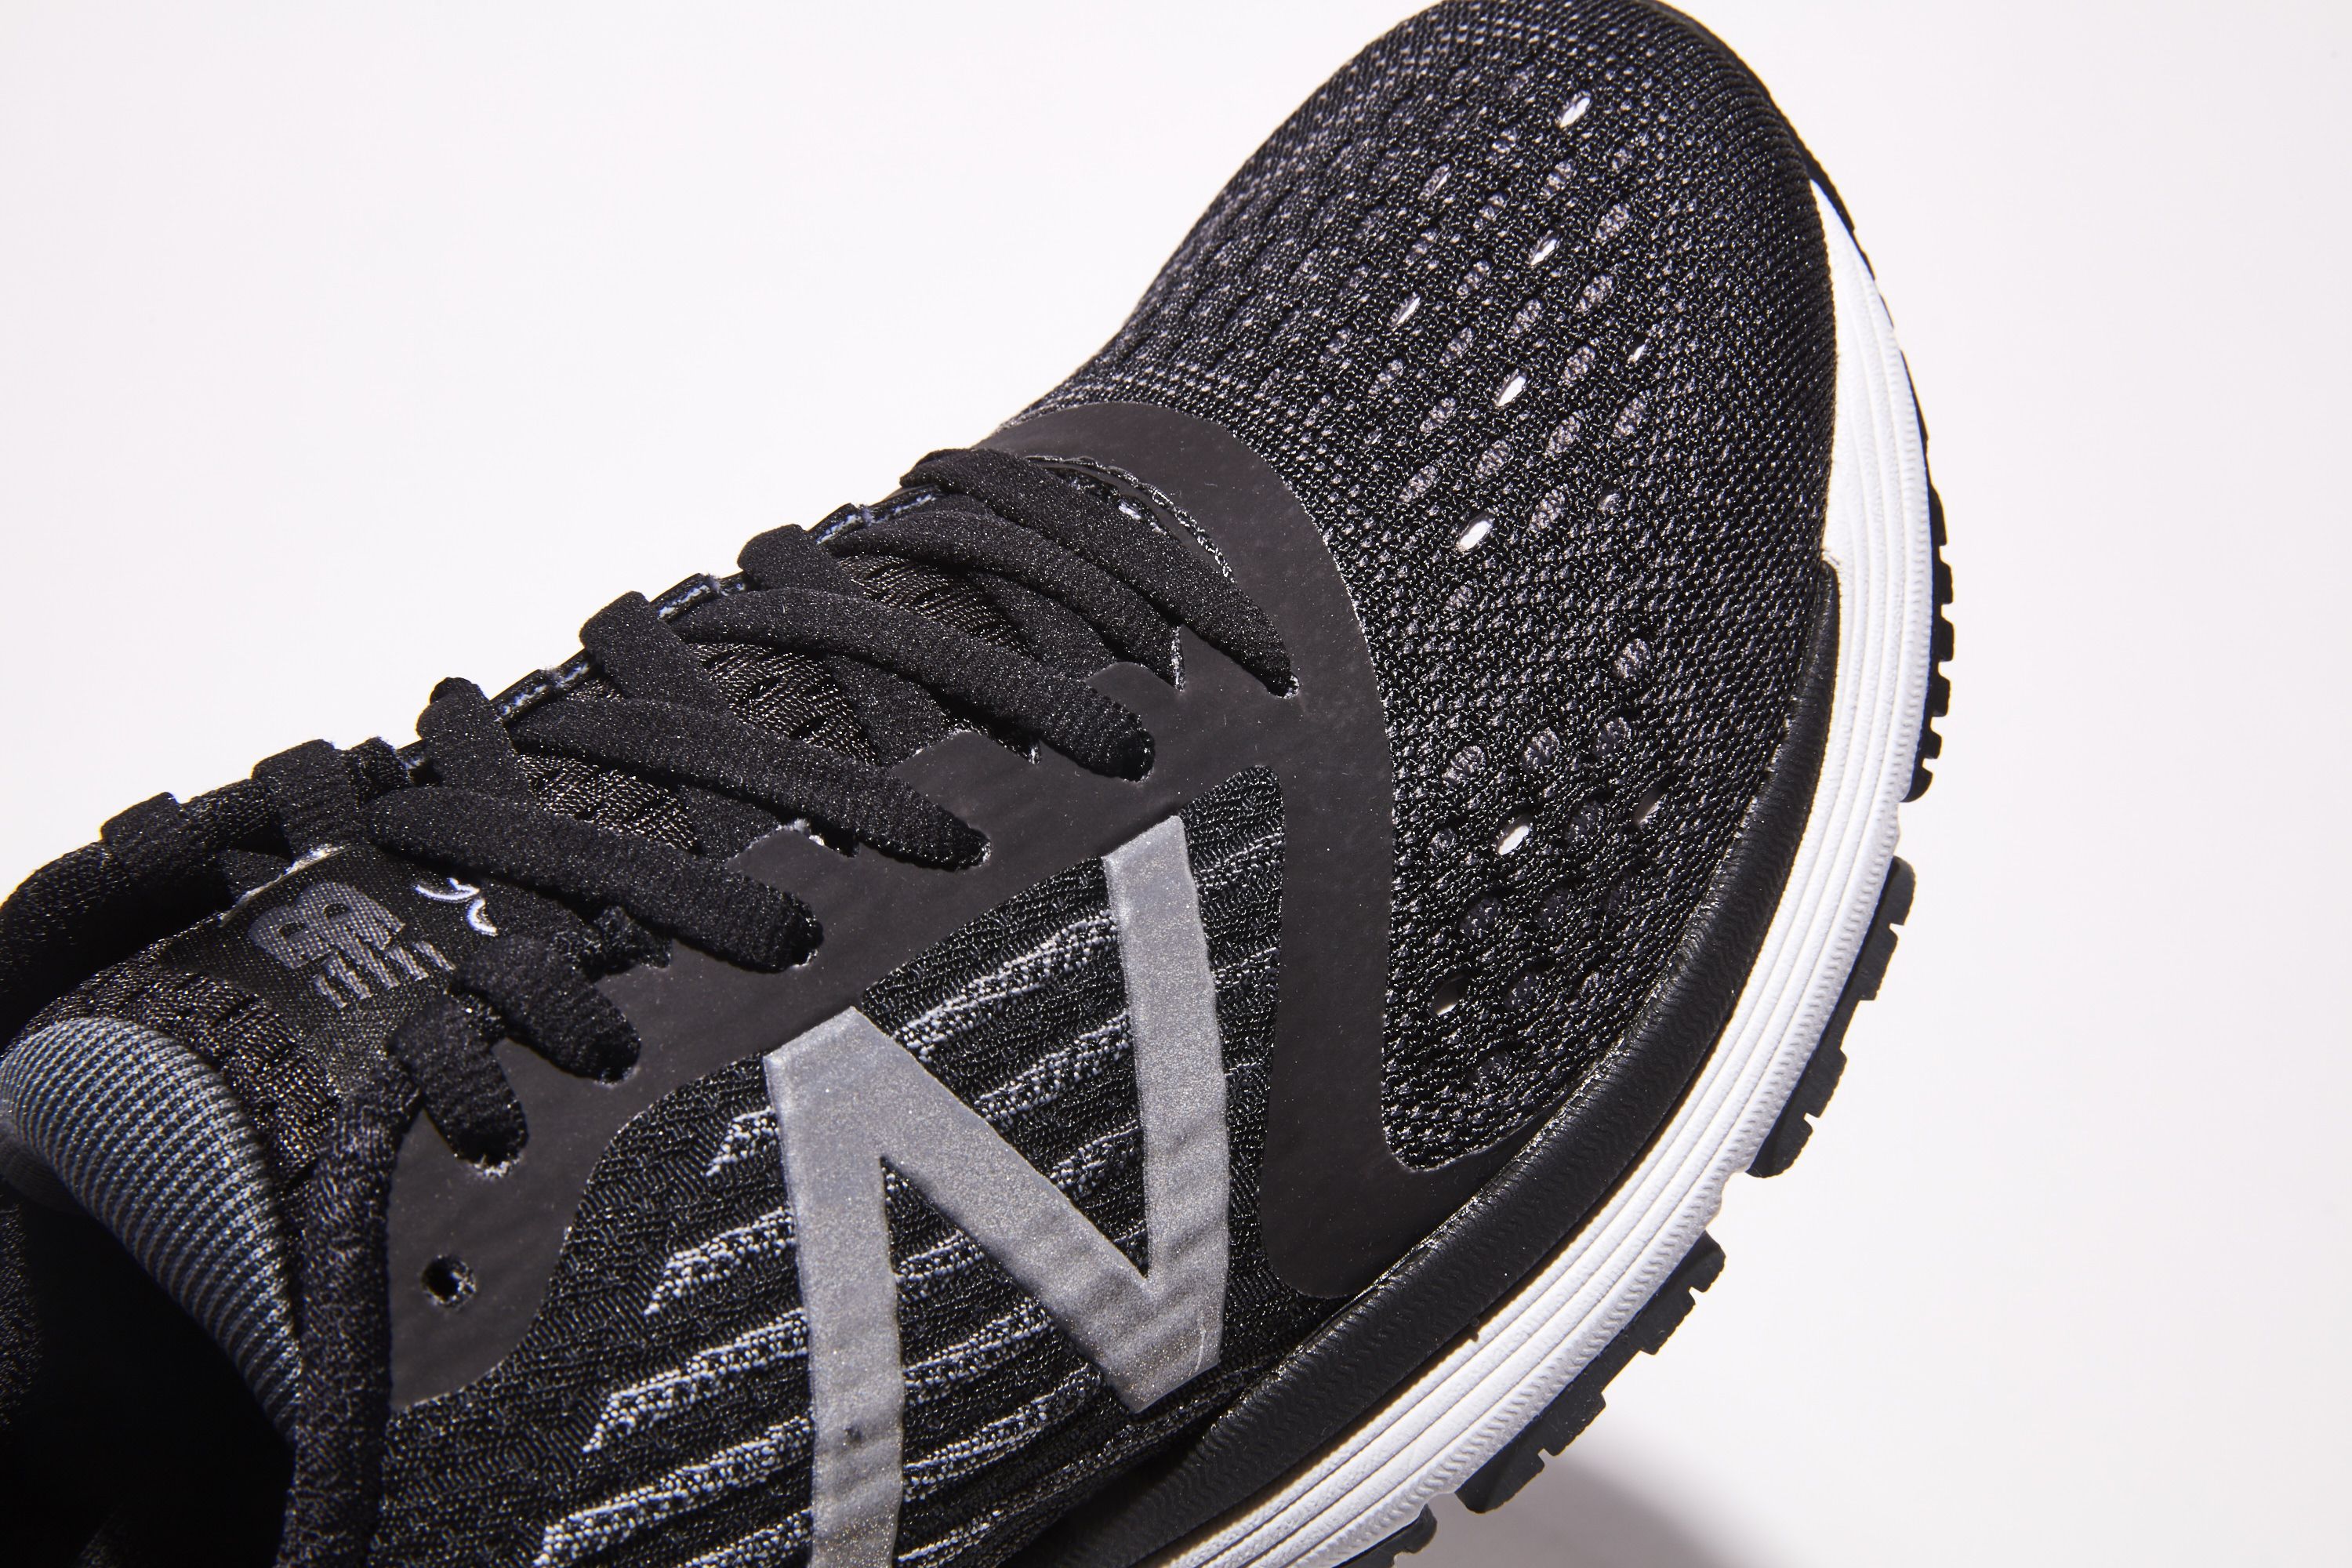 New Balance 860v9 Review - Moderate Stability Shoe Review